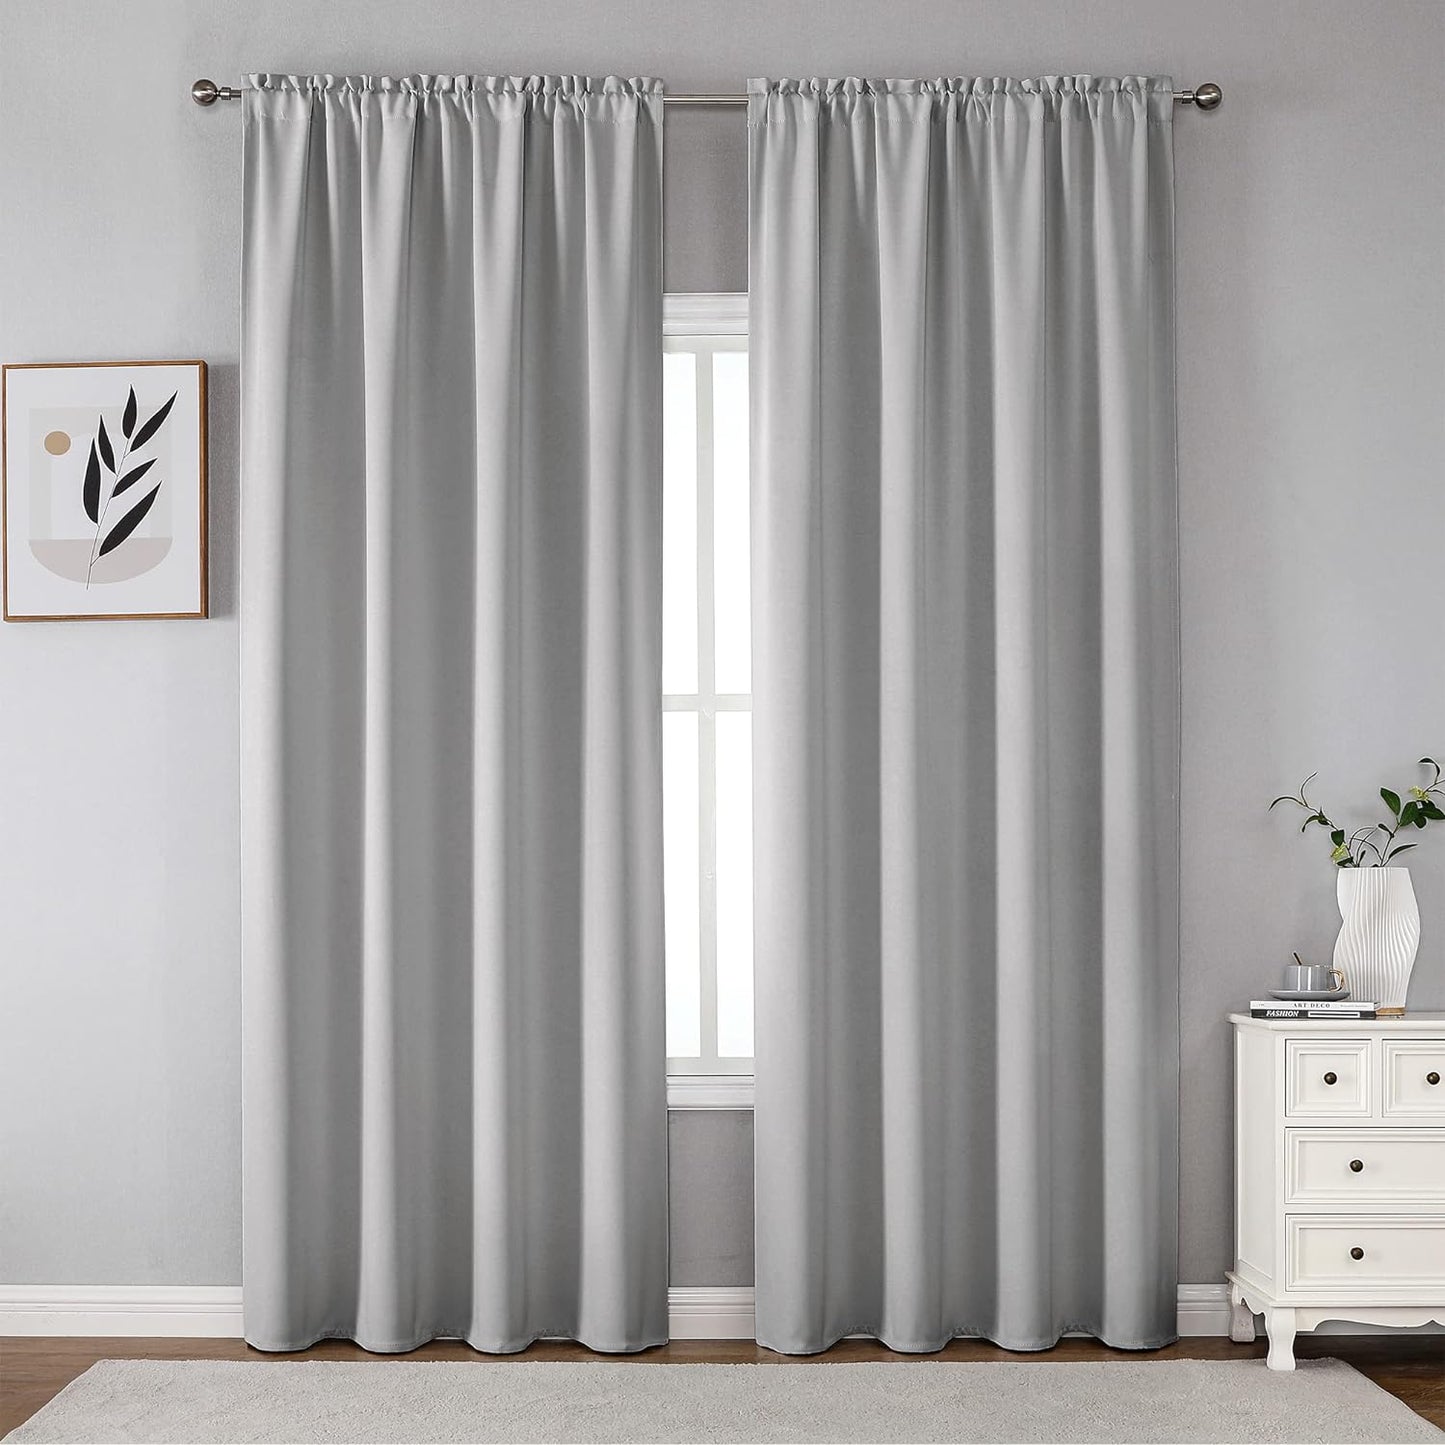 CUCRAF Blackout Curtains 84 Inches Long for Living Room, Light Beige Room Darkening Window Curtain Panels, Rod Pocket Thermal Insulated Solid Drapes for Bedroom, 52X84 Inch, Set of 2 Panels  CUCRAF Greywish White 52W X 95L Inch 2 Panels 